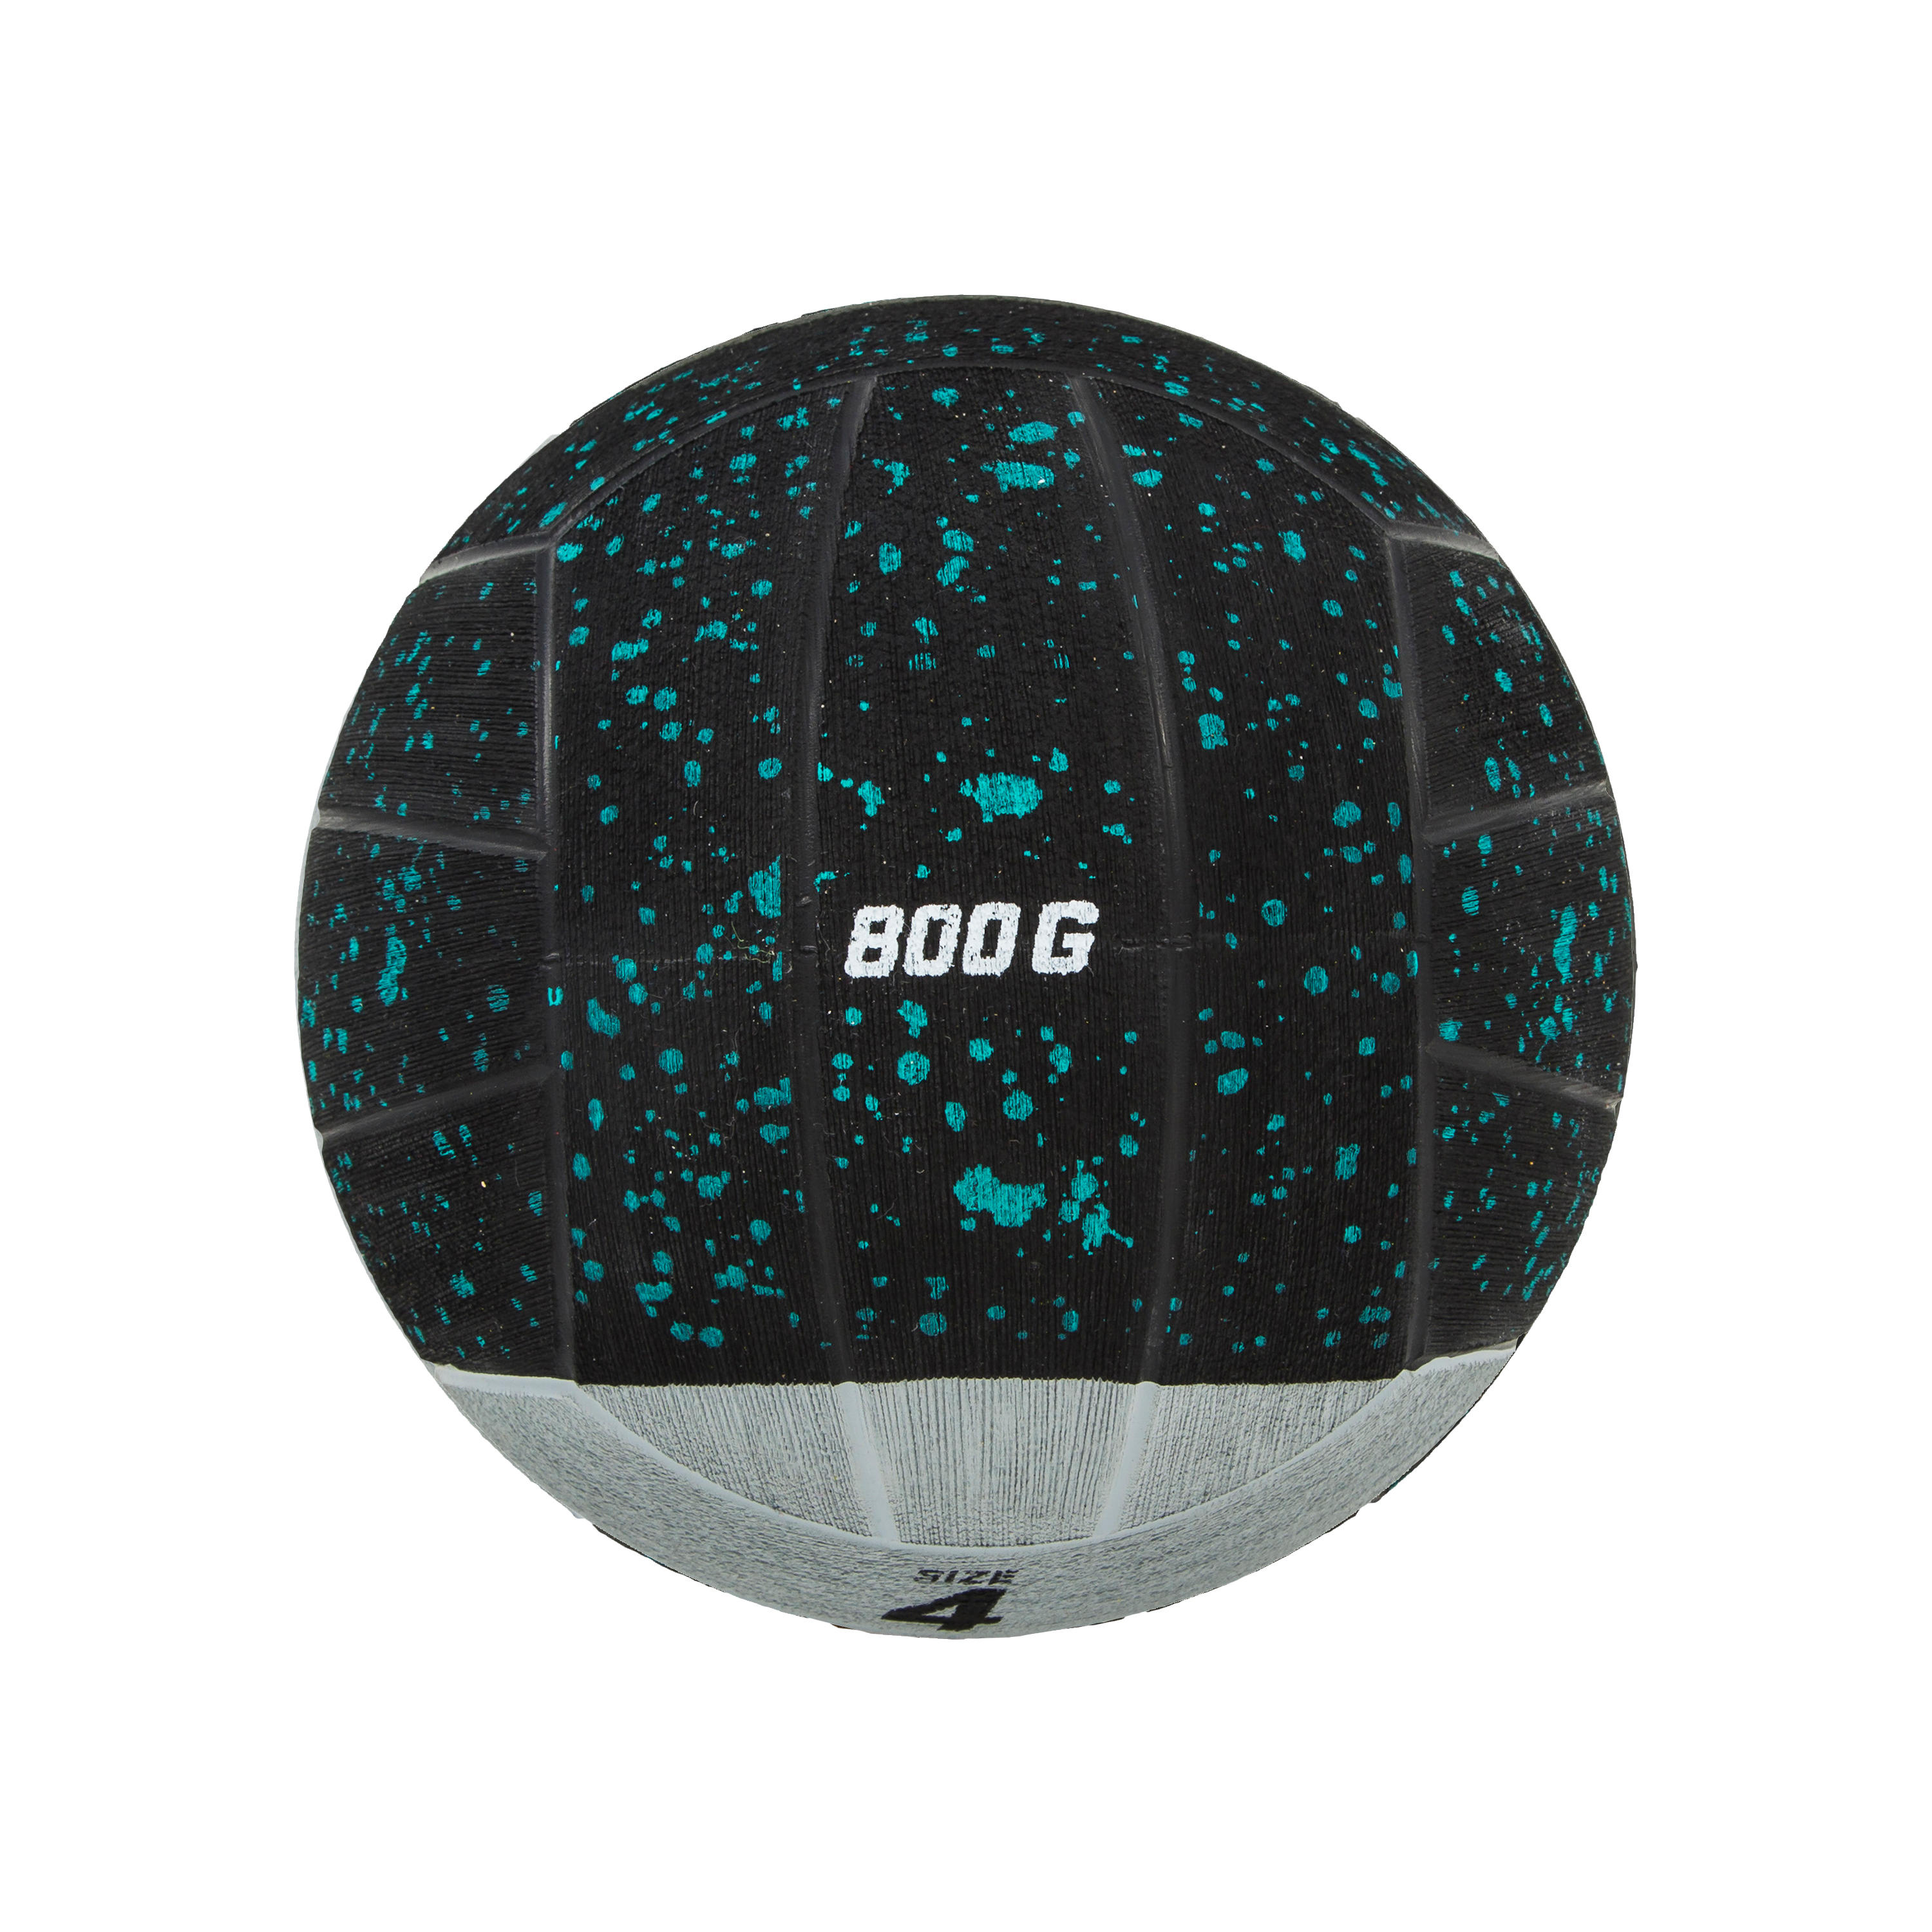 WEIGHTED WATER POLO BALL WP500 800 G SIZE 4 3/4